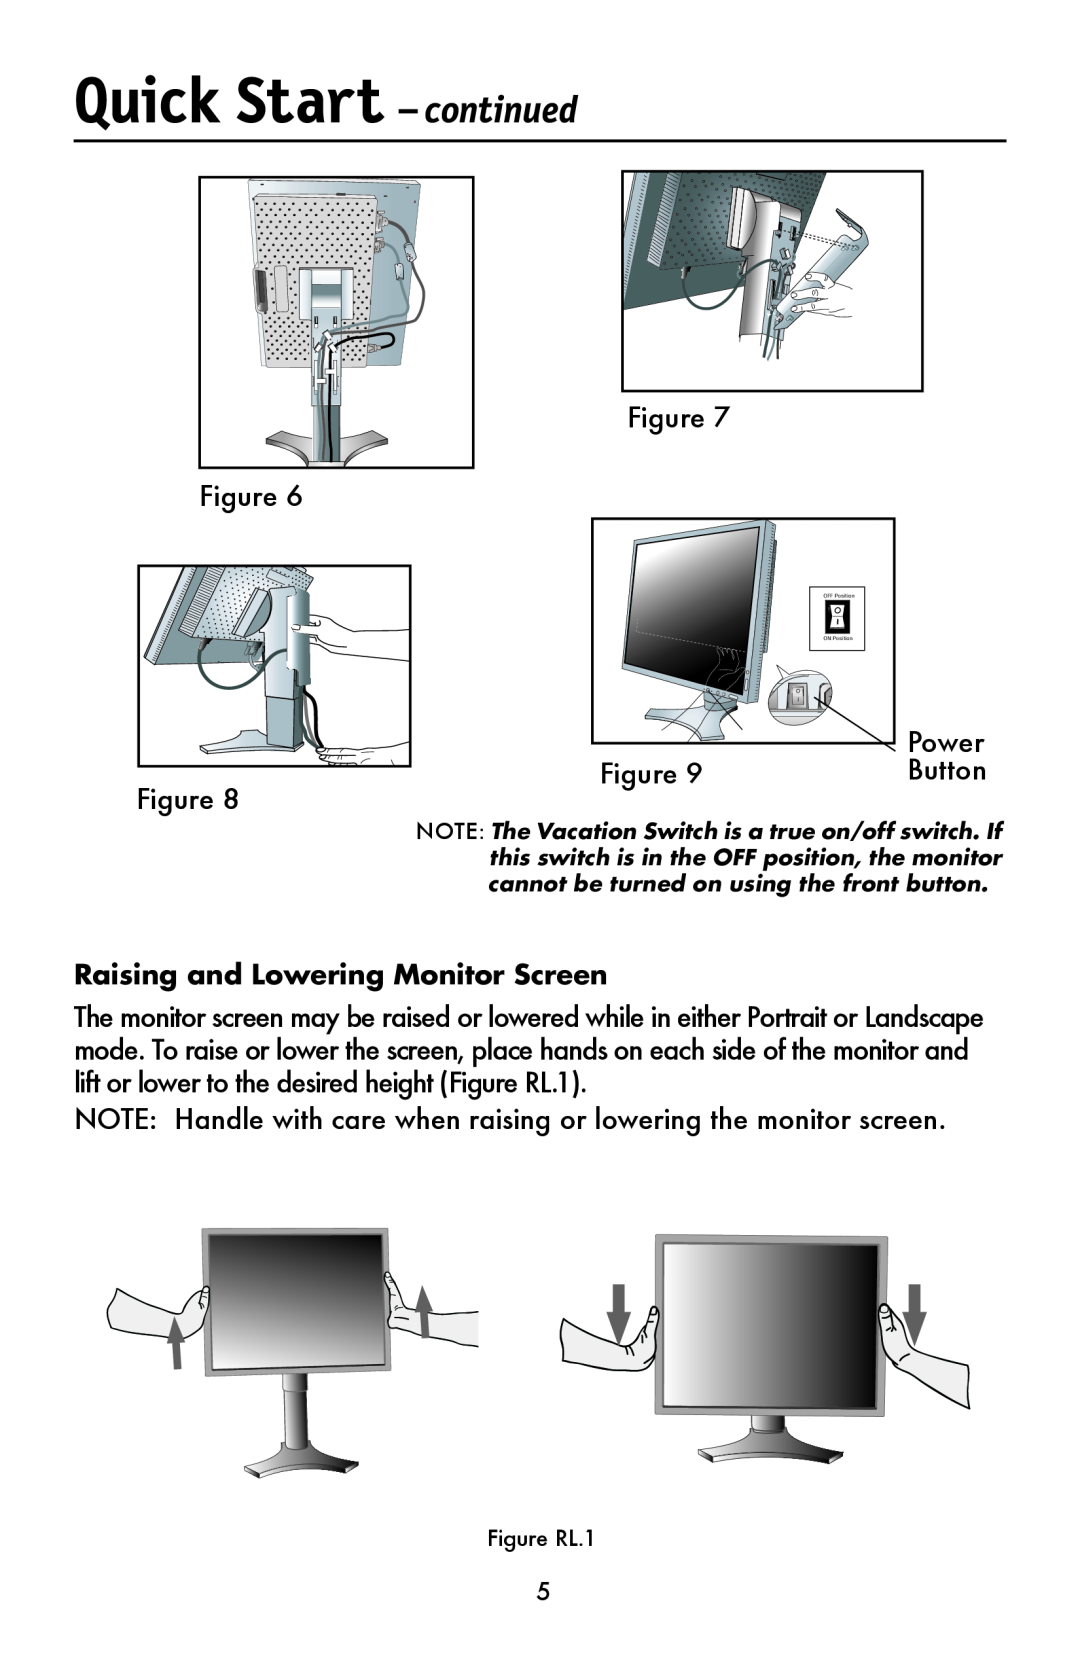 NEC LCD1990FXTM user manual Raising and Lowering Monitor Screen, Quick Start - continued 